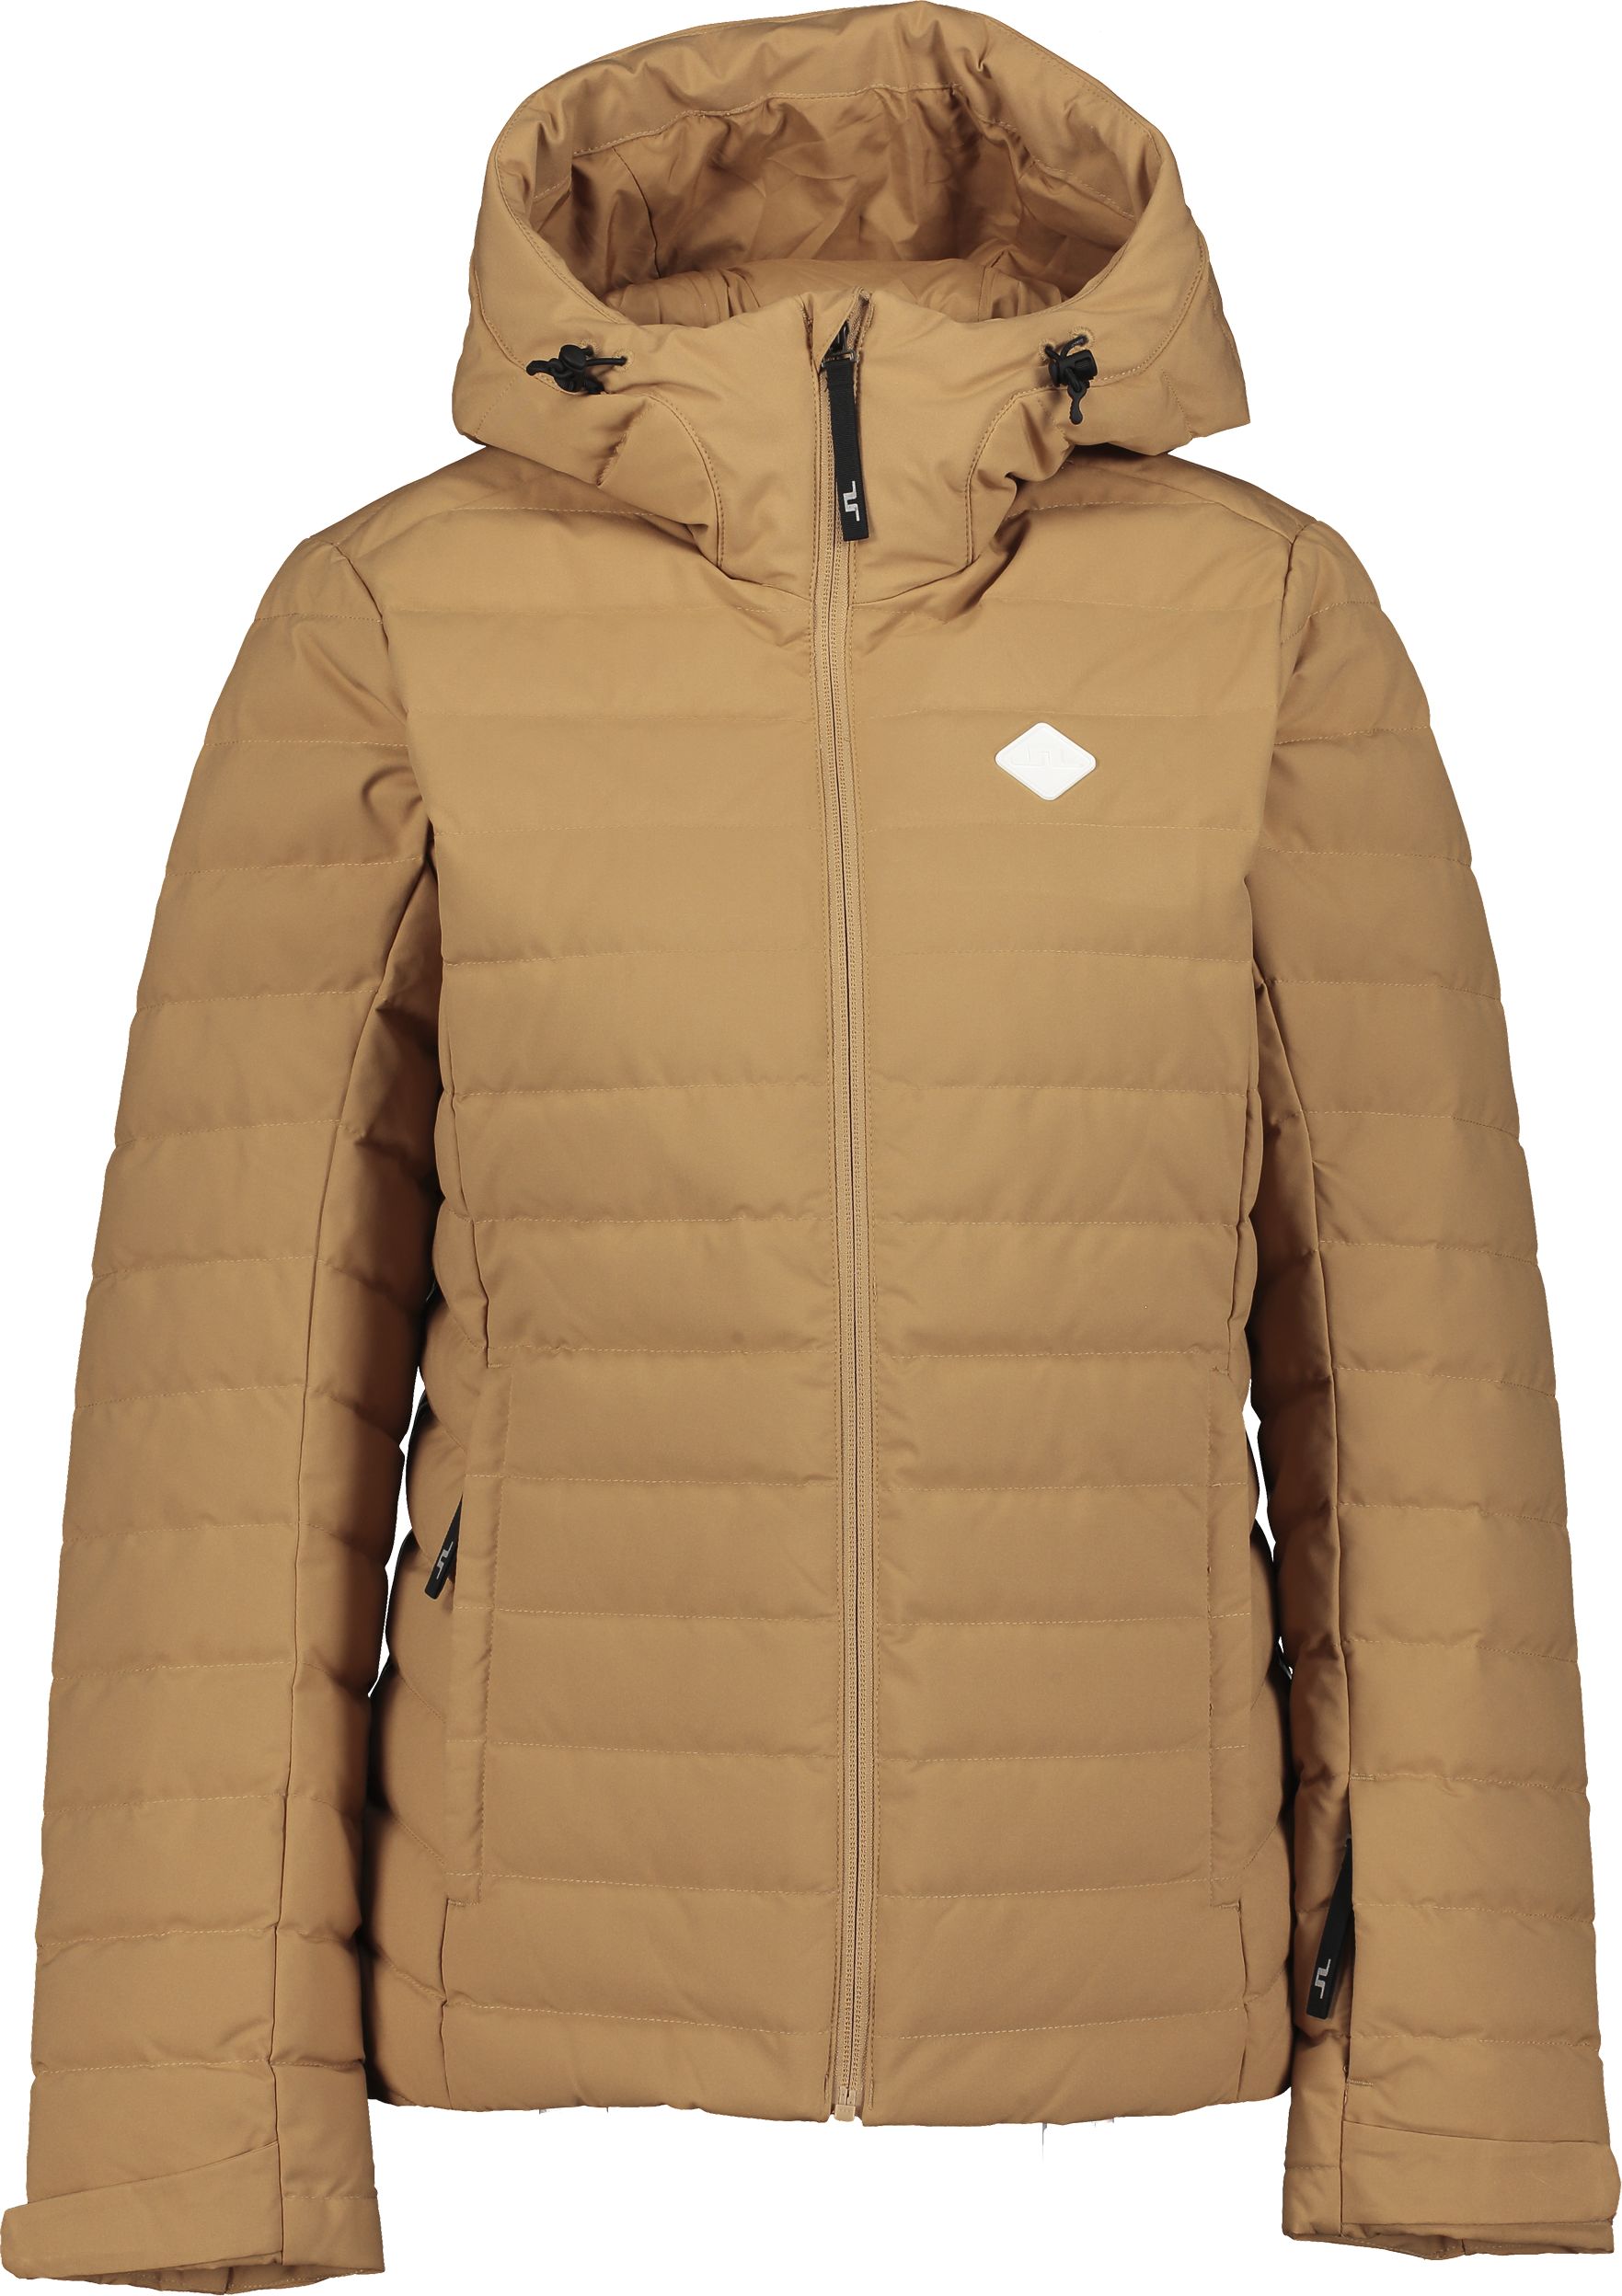 J LINDEBERG, W Thermic Pro Down Jacket